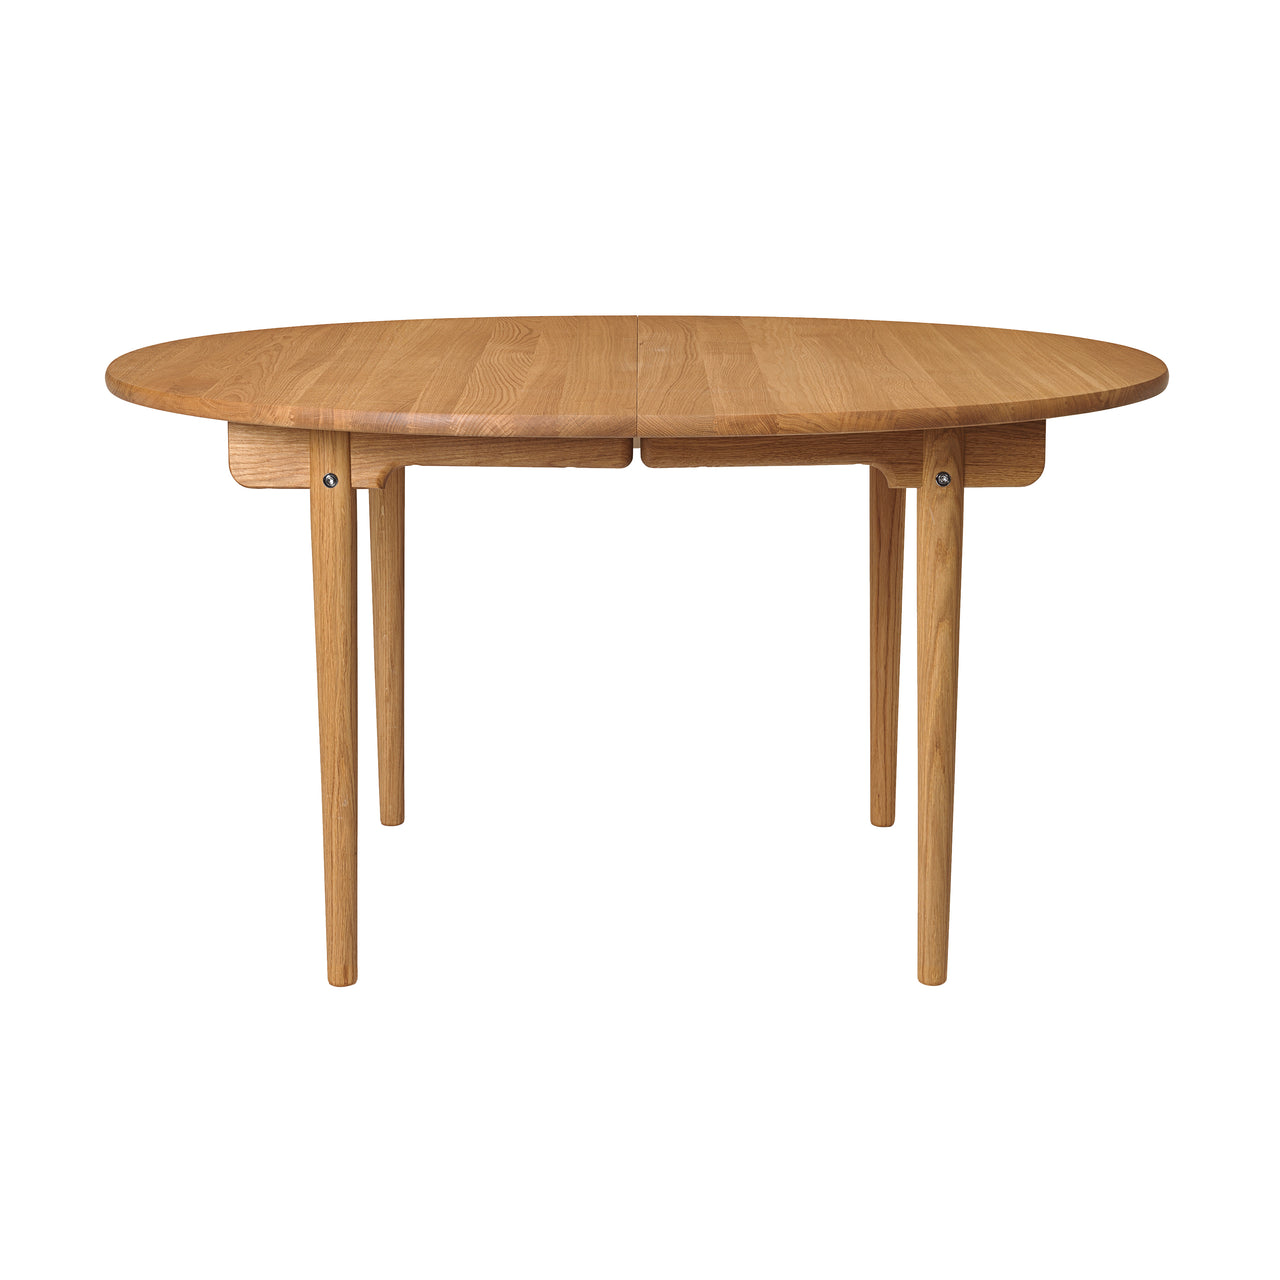 CH337 Dining Table: Oiled Oak + Without Leaf